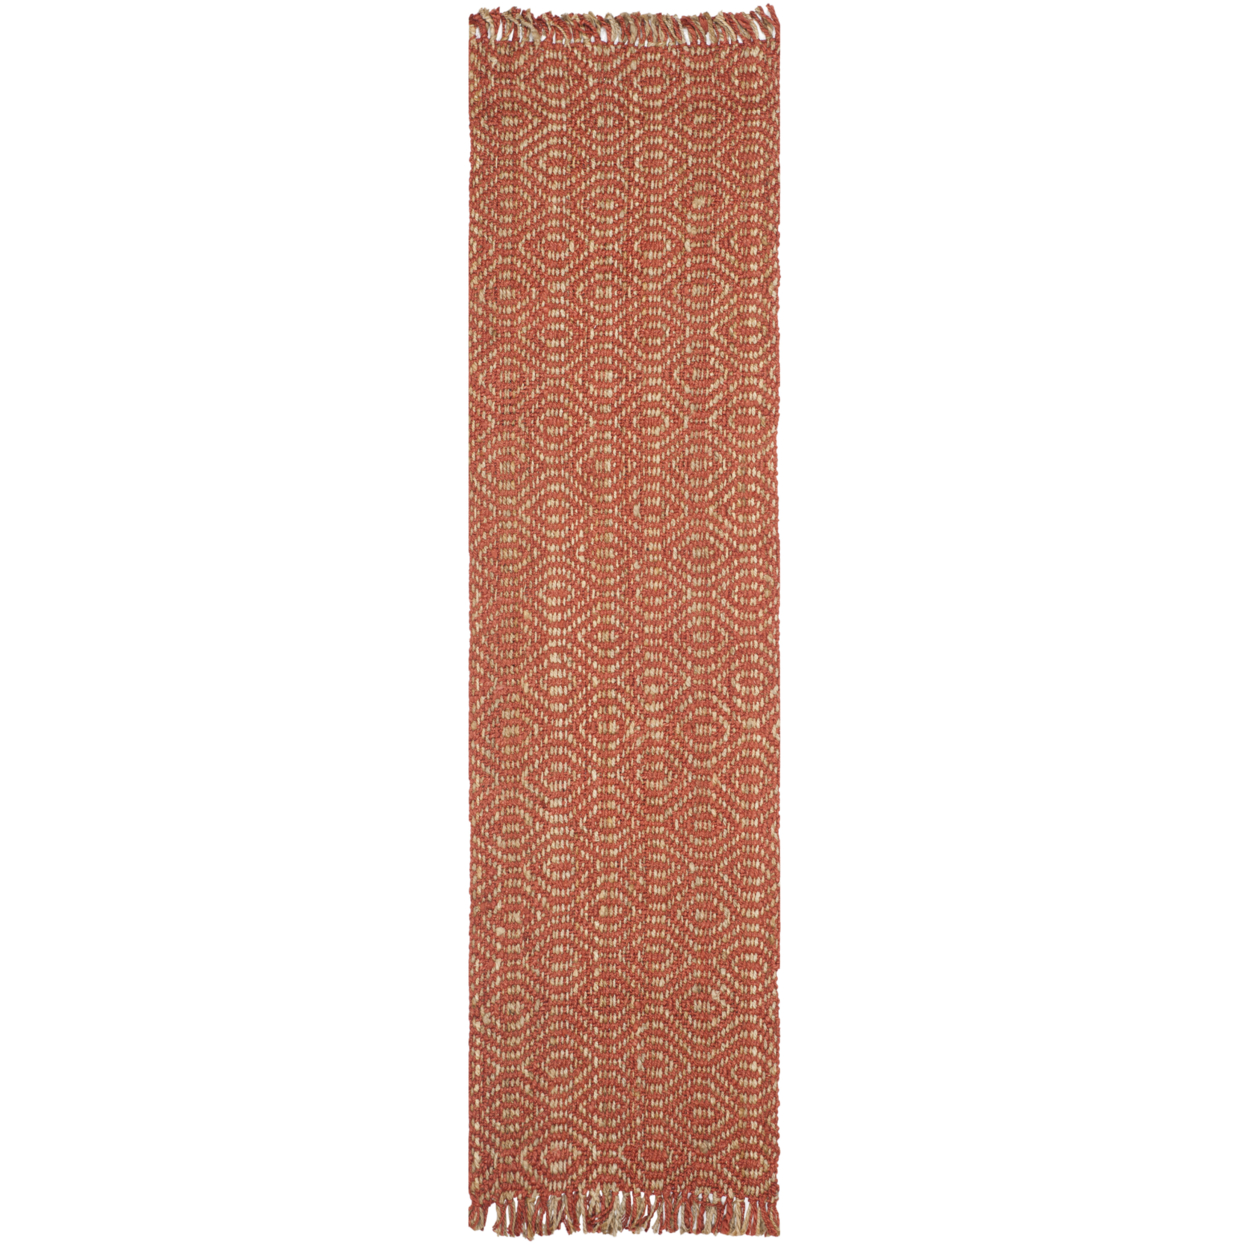 SAFAVIEH Natural Fiber NF445A Handwoven Rust Rug - 6' Square